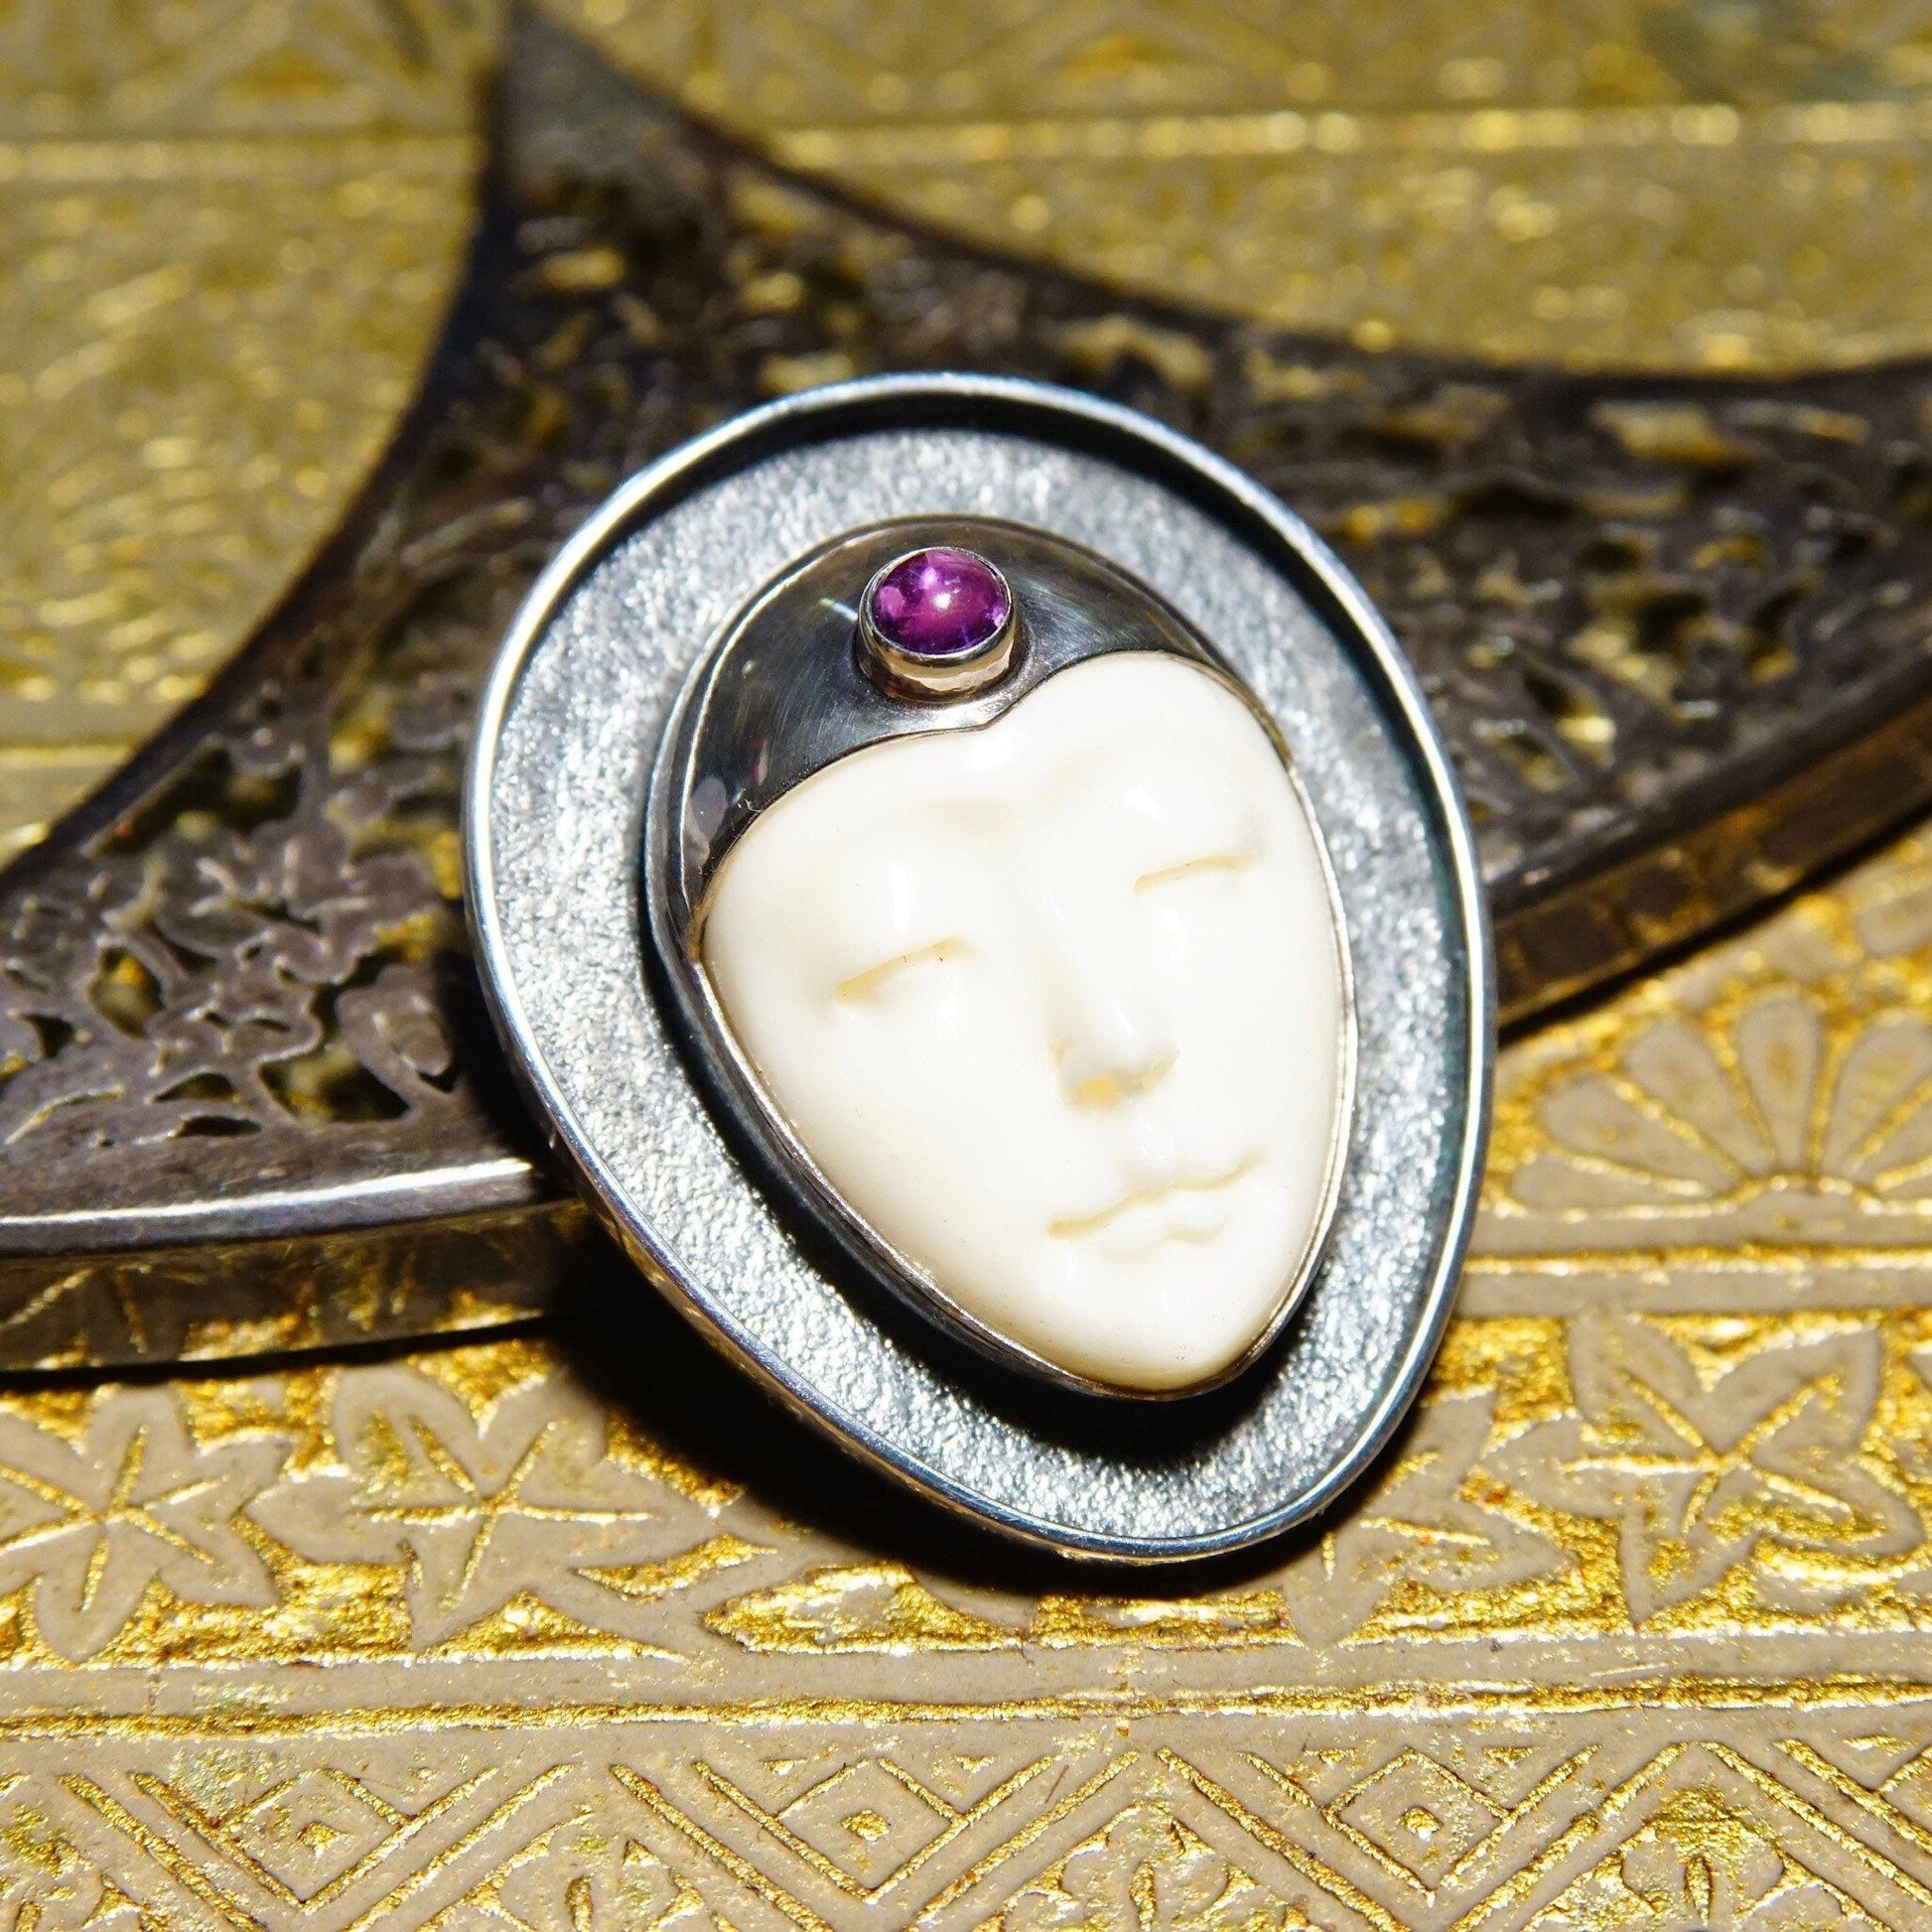 Vintage Sajen sterling silver amethyst and carved bovine bone Moon Goddess pendant brooch on golden textured background, unique extraterrestrial-inspired 925 jewelry piece measuring 1 1/2 inches.